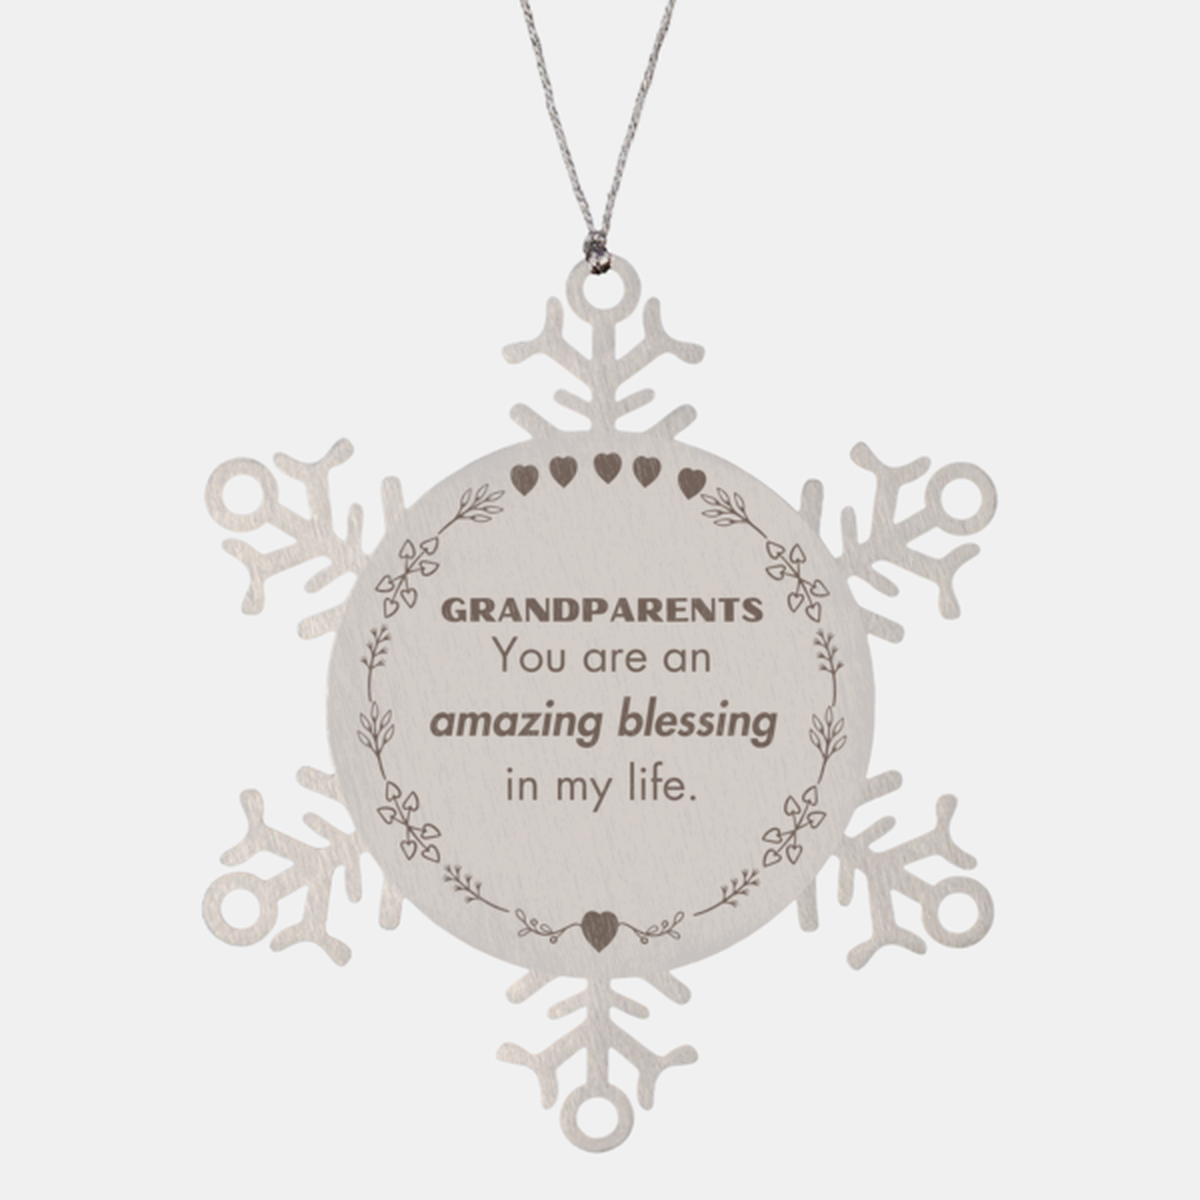 Grandparents Snowflake Ornament, You are an amazing blessing in my life, Thank You Gifts For Grandparents, Inspirational Birthday Christmas Unique Gifts For Grandparents